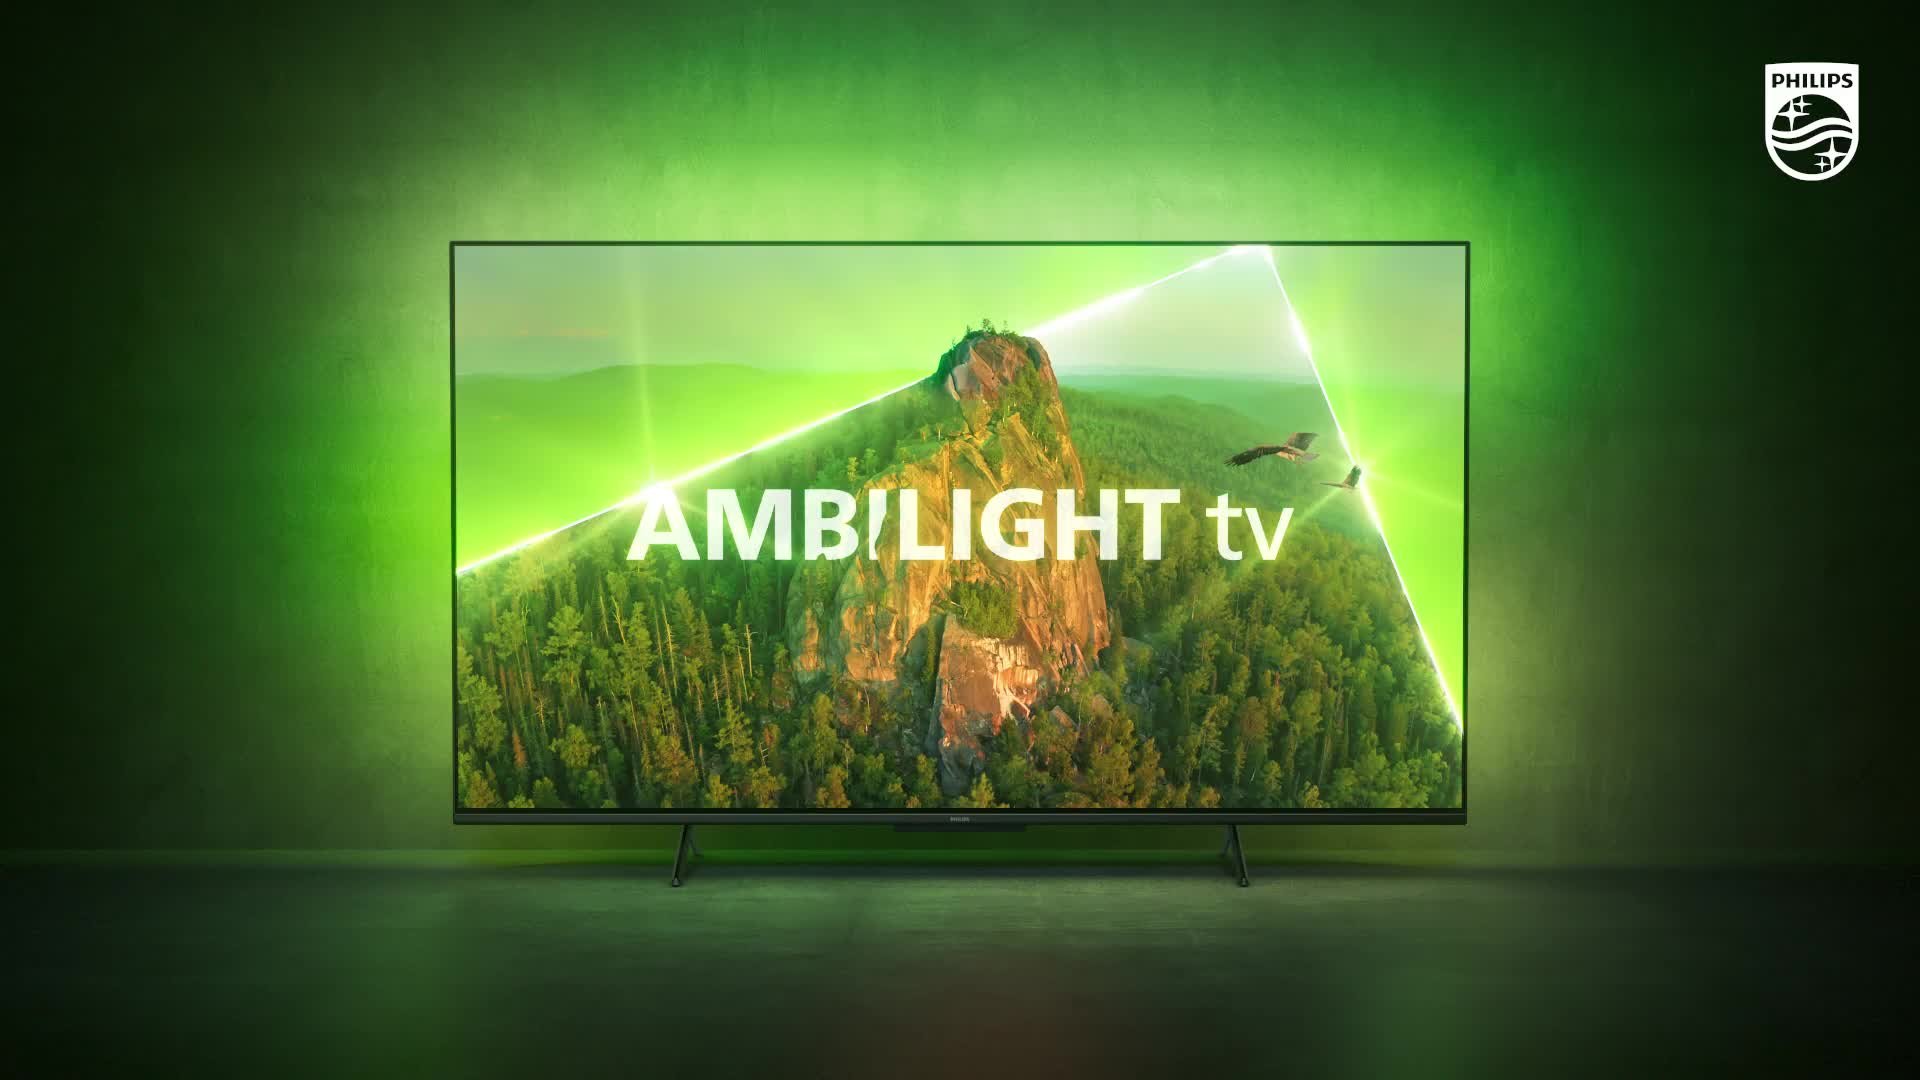 Buy Philips Ambilight 55In PUS8108 Smart 4K HDR LED Freeview TV, Televisions